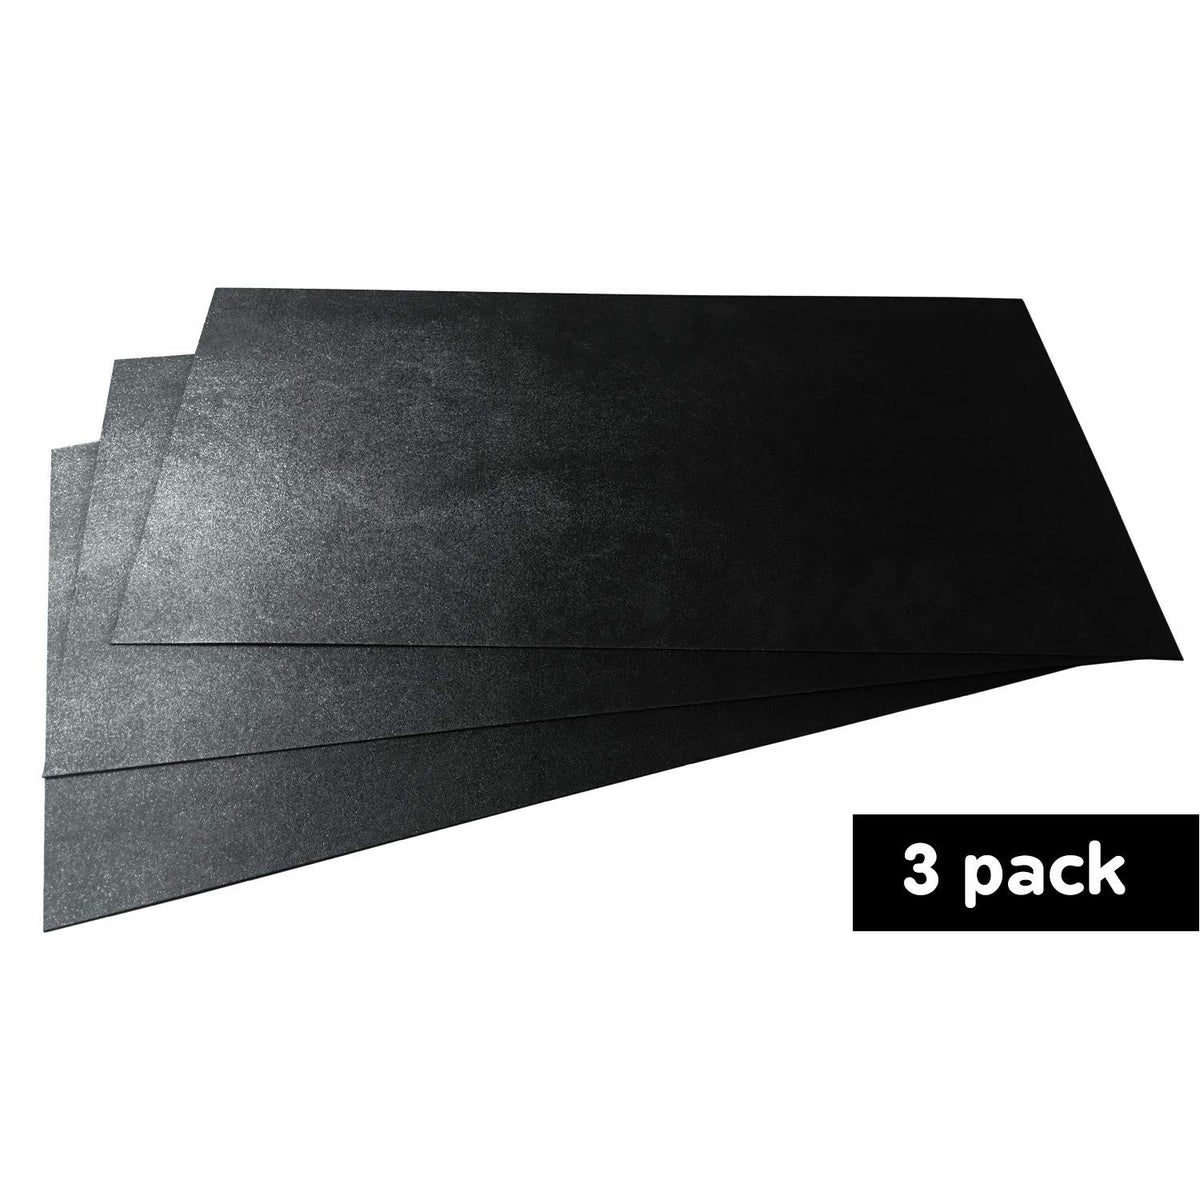 USAMade Usamades 5 Pack 12x12x.062 ABS Plastic Sheets, Moldable Plastic Sheets, Great for DIY Projects, High Tensile and Impact Strength Plastic, Made in USA